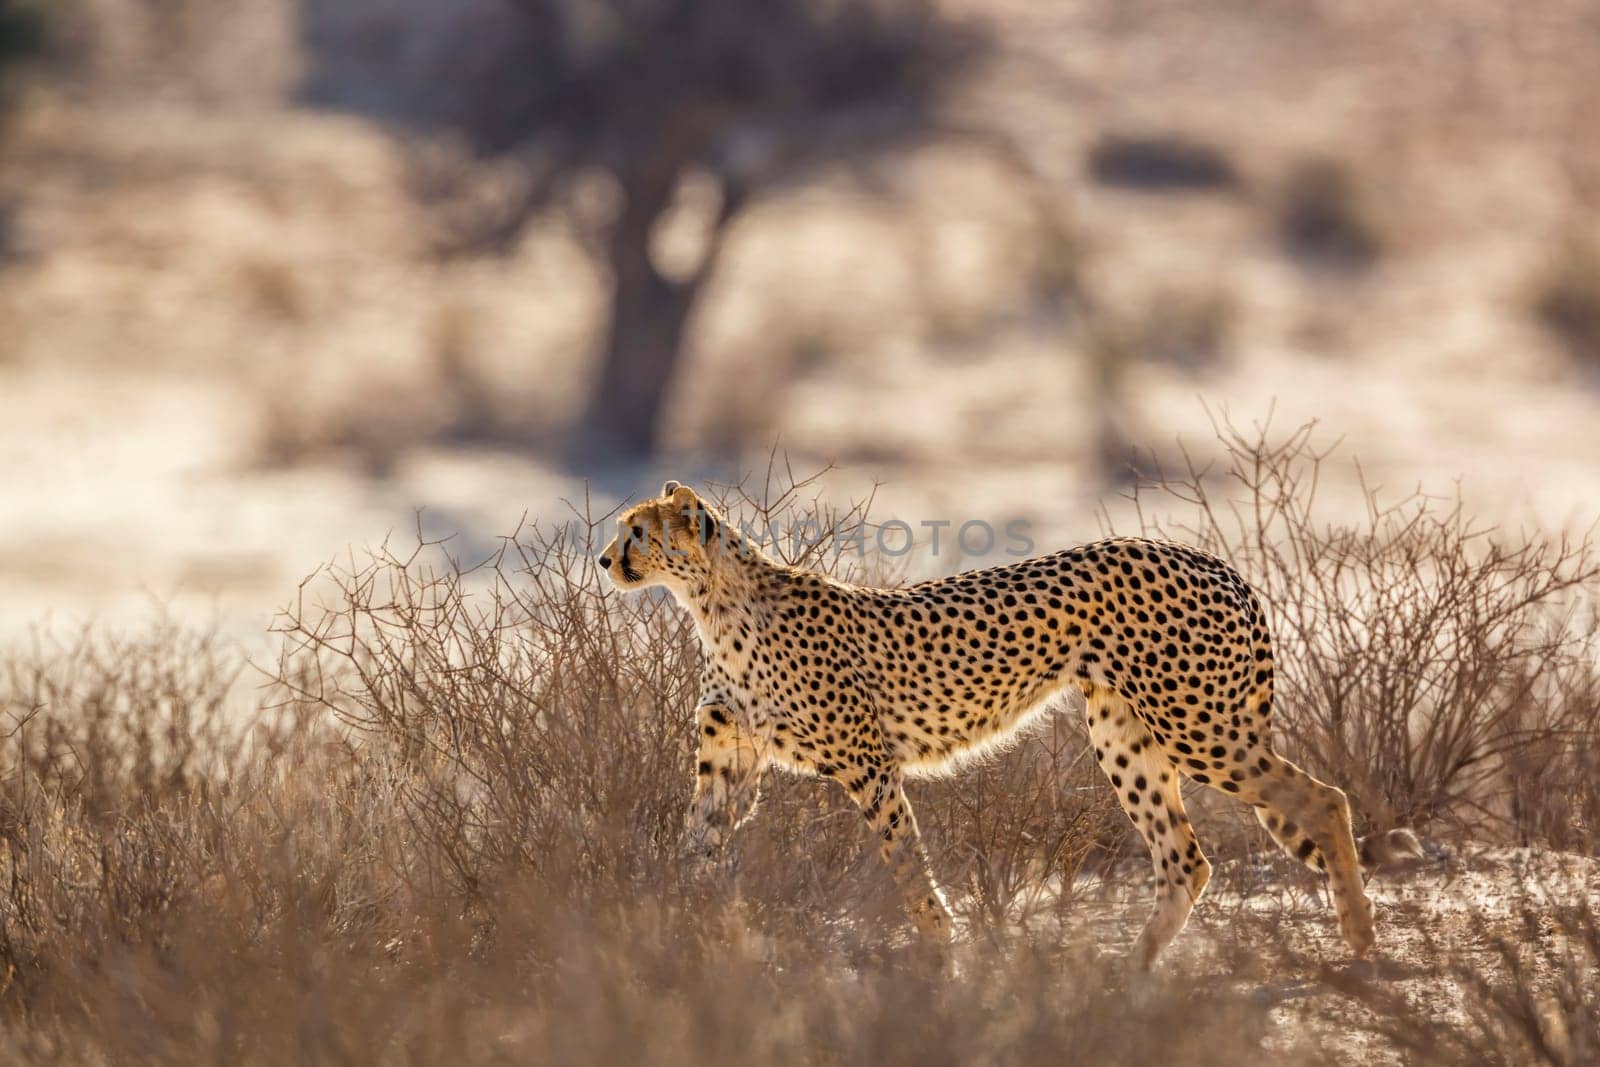 Cheetah in Kgalagadi transfrontier park, South Africa by PACOCOMO